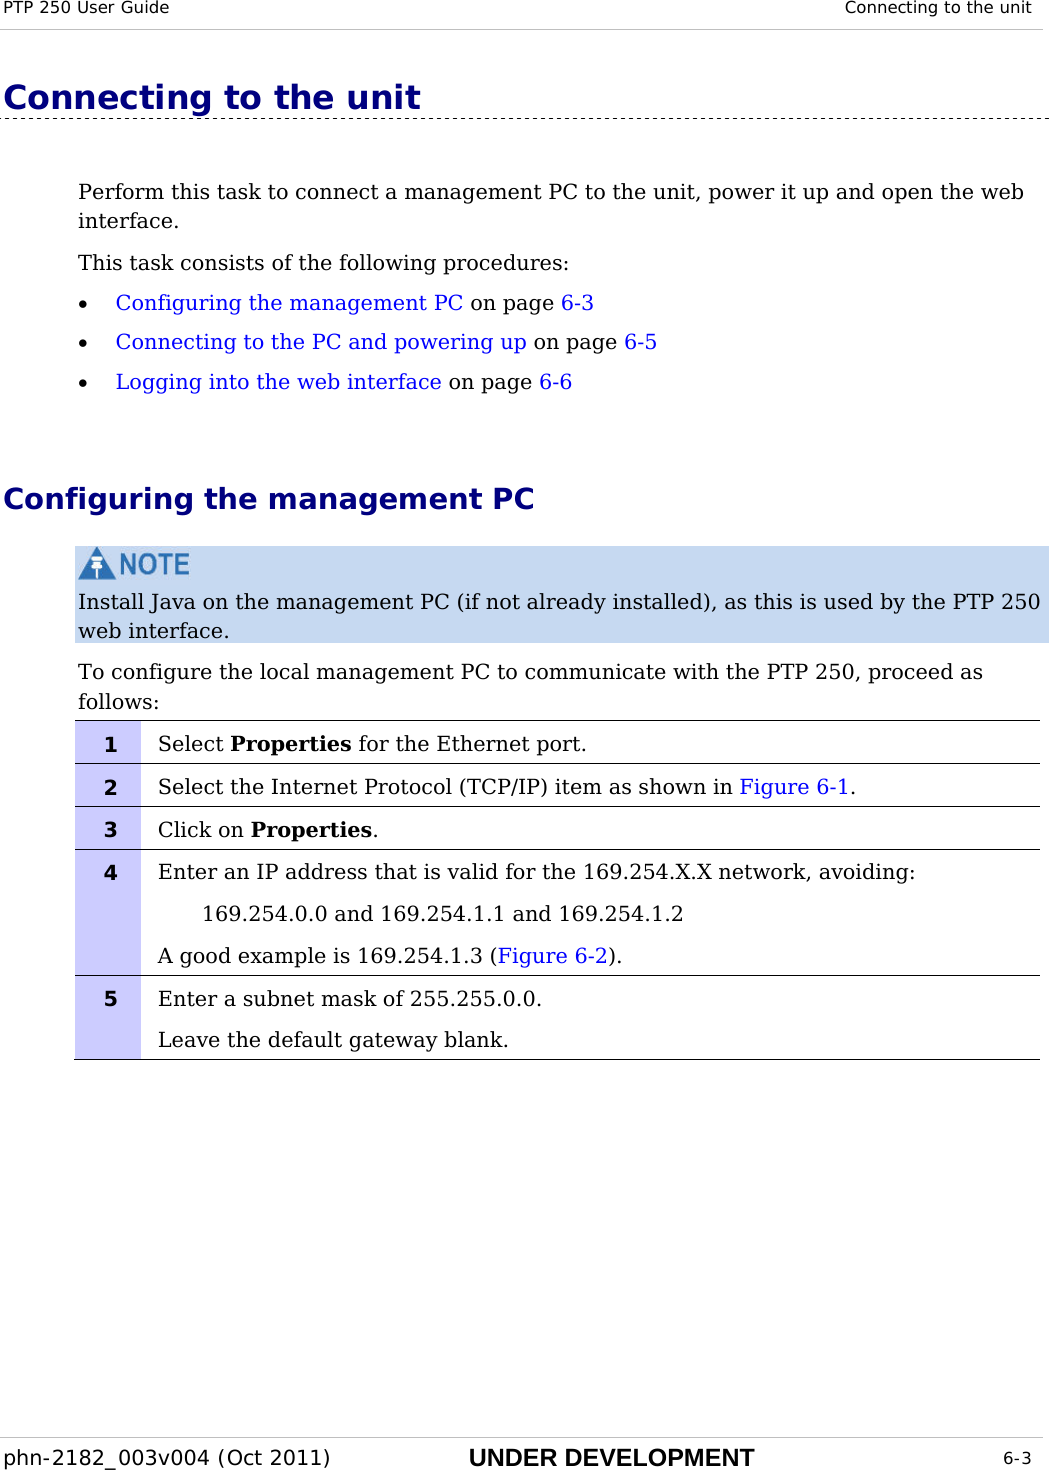 PTP 250 User Guide  Connecting to the unit  phn-2182_003v004 (Oct 2011)  UNDER DEVELOPMENT  6-3  Connecting to the unit Perform this task to connect a management PC to the unit, power it up and open the web interface. This task consists of the following procedures: • Configuring the management PC on page 6-3 • Connecting to the PC and powering up on page 6-5 • Logging into the web interface on page 6-6  Configuring the management PC  Install Java on the management PC (if not already installed), as this is used by the PTP 250 web interface. To configure the local management PC to communicate with the PTP 250, proceed as follows: 1  Select Properties for the Ethernet port. 2  Select the Internet Protocol (TCP/IP) item as shown in Figure 6-1. 3  Click on Properties. 4  Enter an IP address that is valid for the 169.254.X.X network, avoiding: 169.254.0.0 and 169.254.1.1 and 169.254.1.2 A good example is 169.254.1.3 (Figure 6-2). 5  Enter a subnet mask of 255.255.0.0. Leave the default gateway blank.   